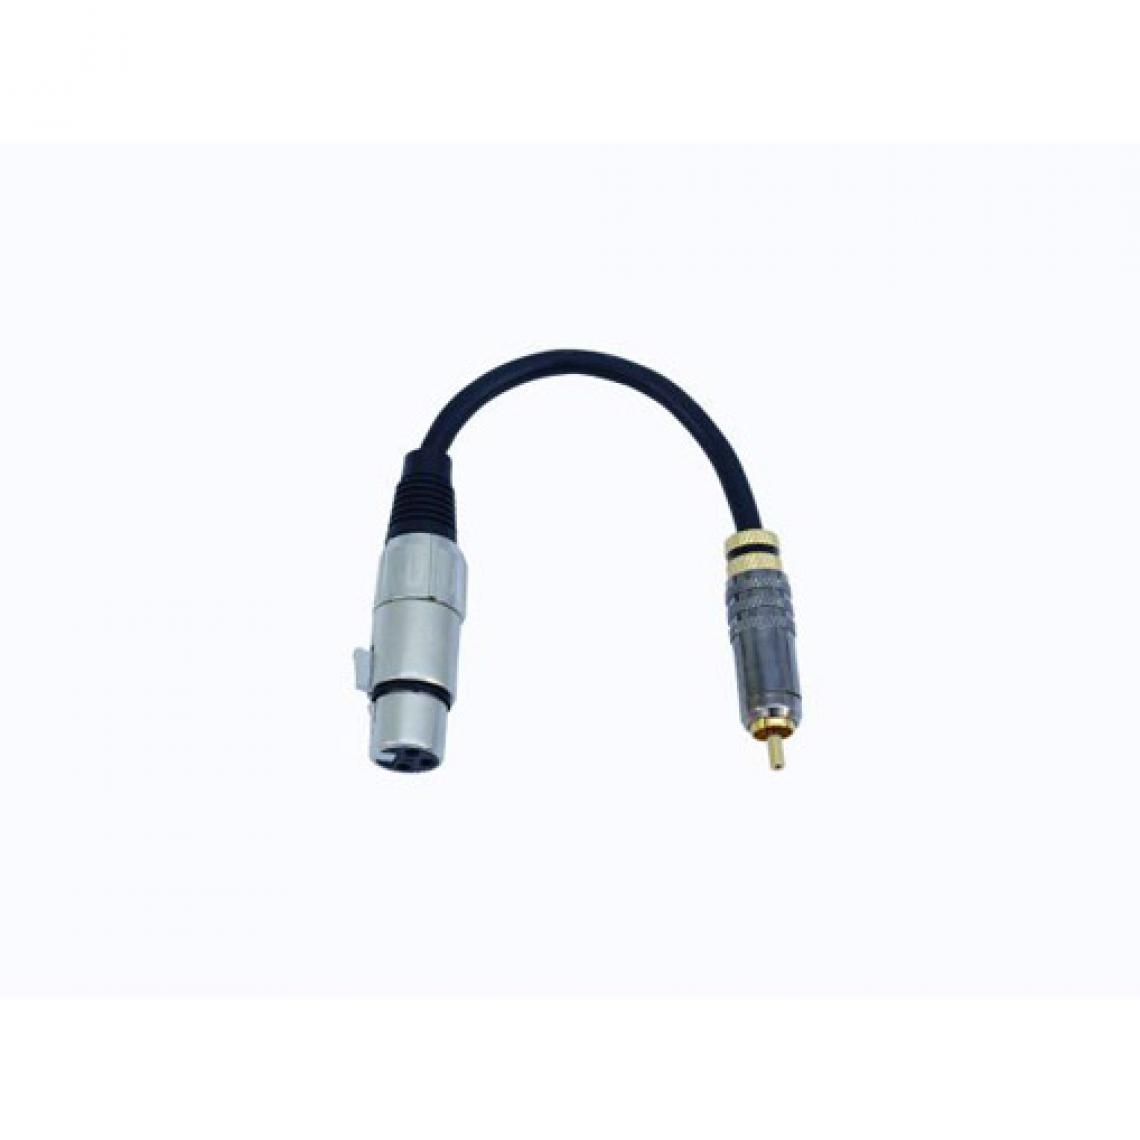 Electronic Star - Câble RCA vers XLR femelle Adaptateur SADC Electronic Star - accessoires cables meubles supports